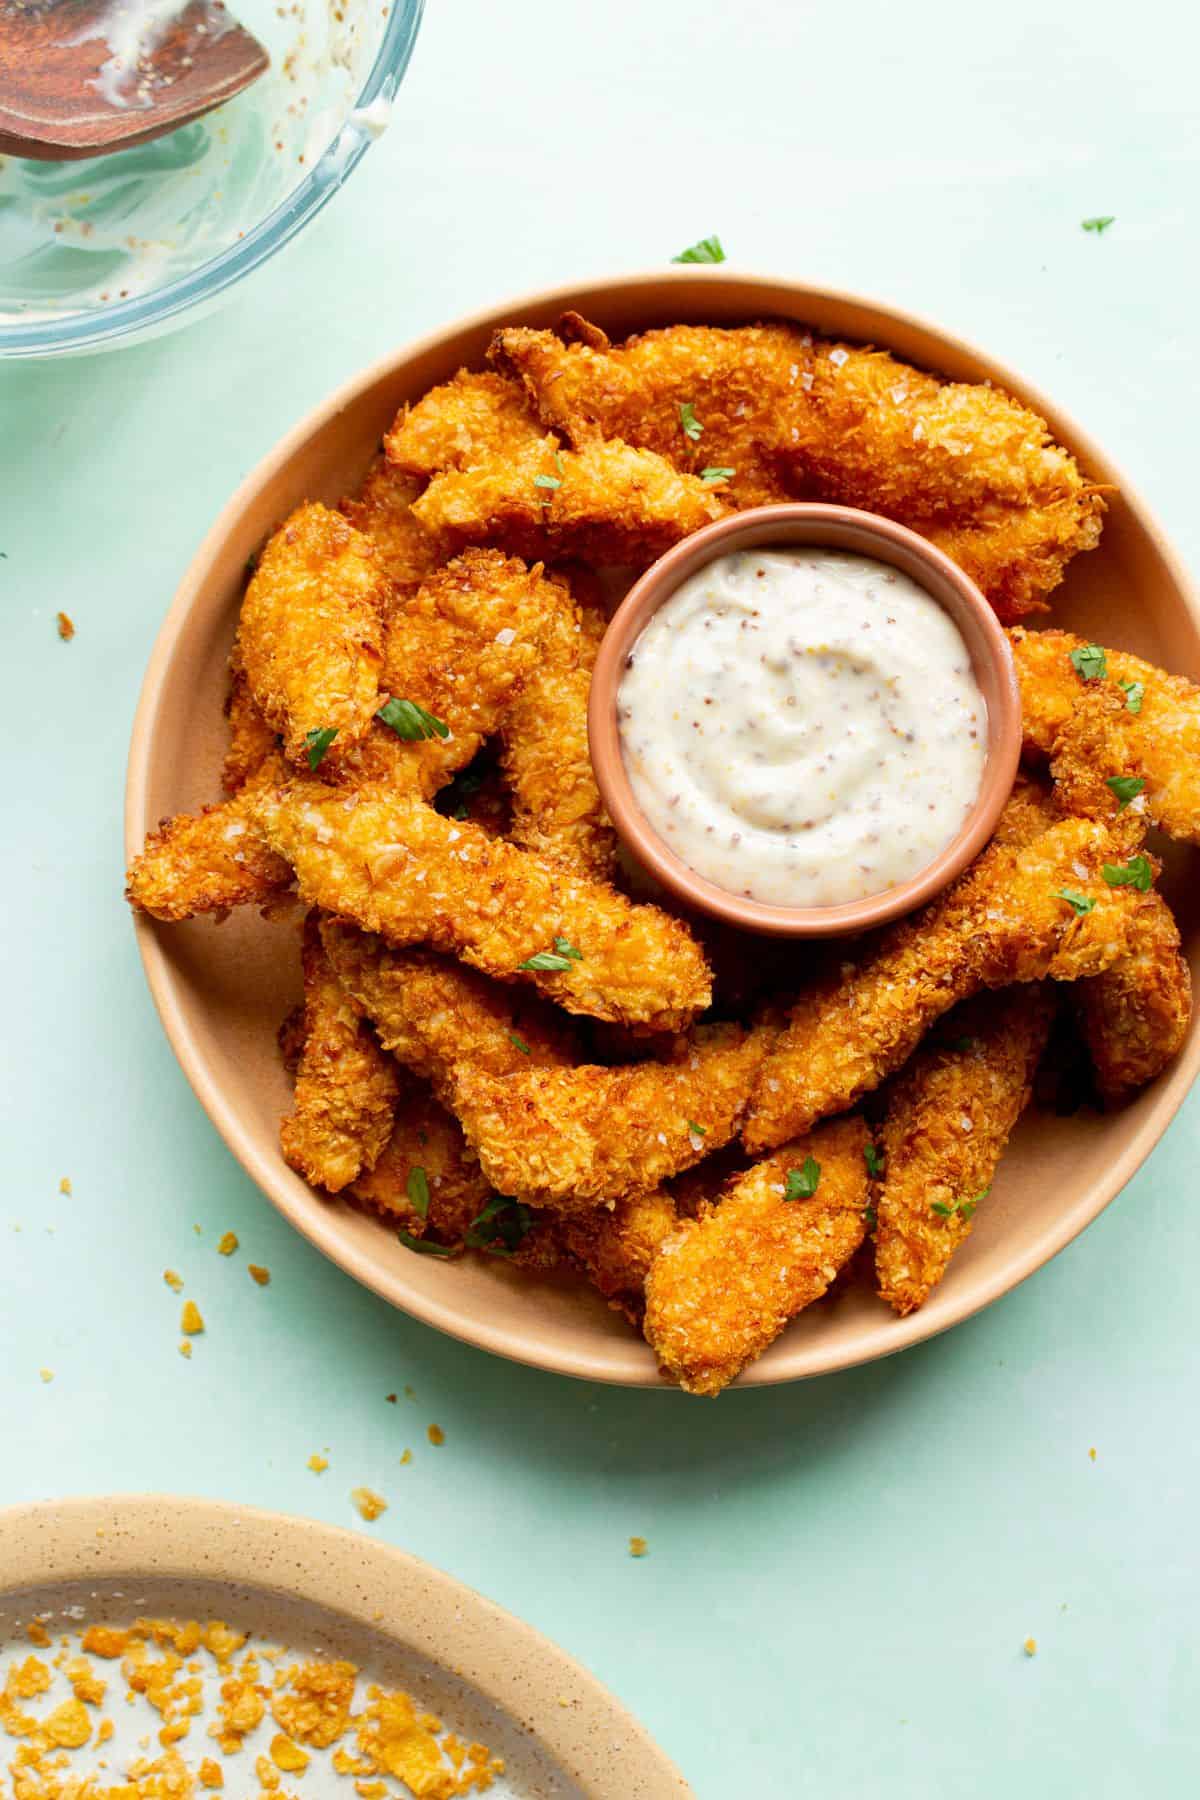 Chicken goujons with dip